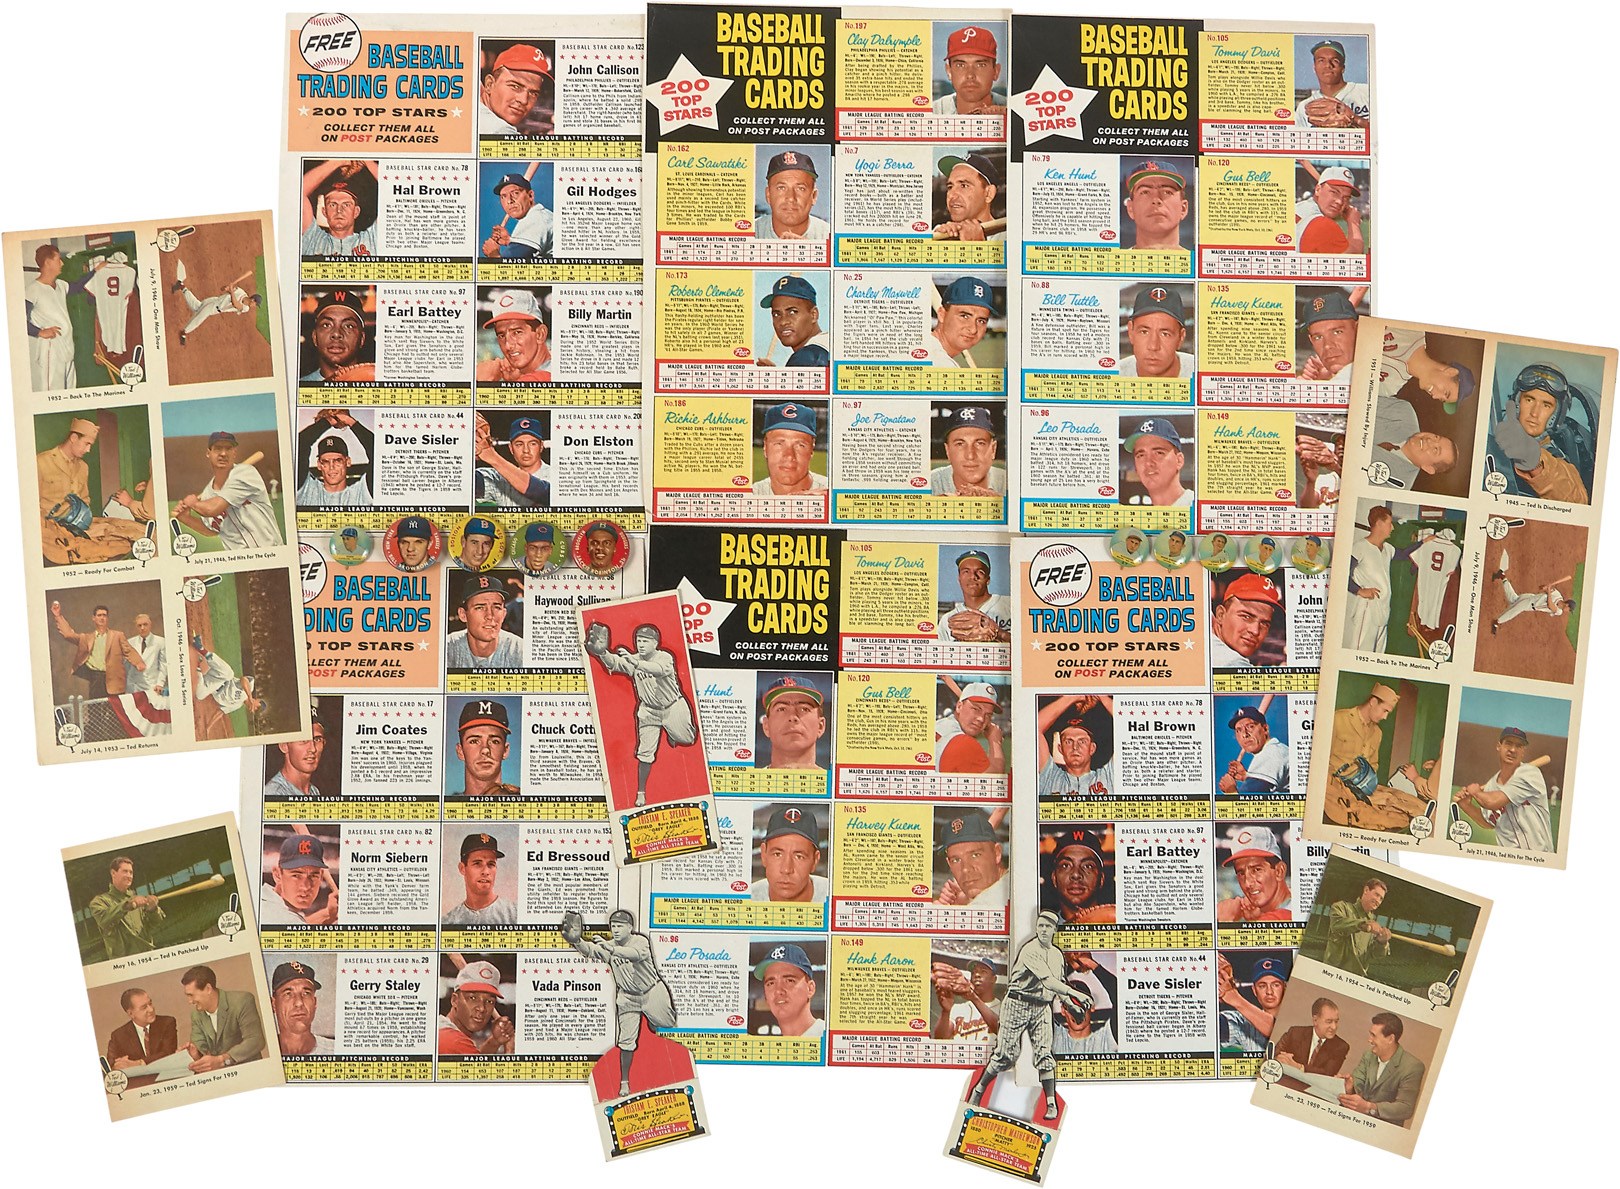 Baseball and Trading Cards - 1930s-1950s Baseball Card & Pin Collection with Major Stars (20+)